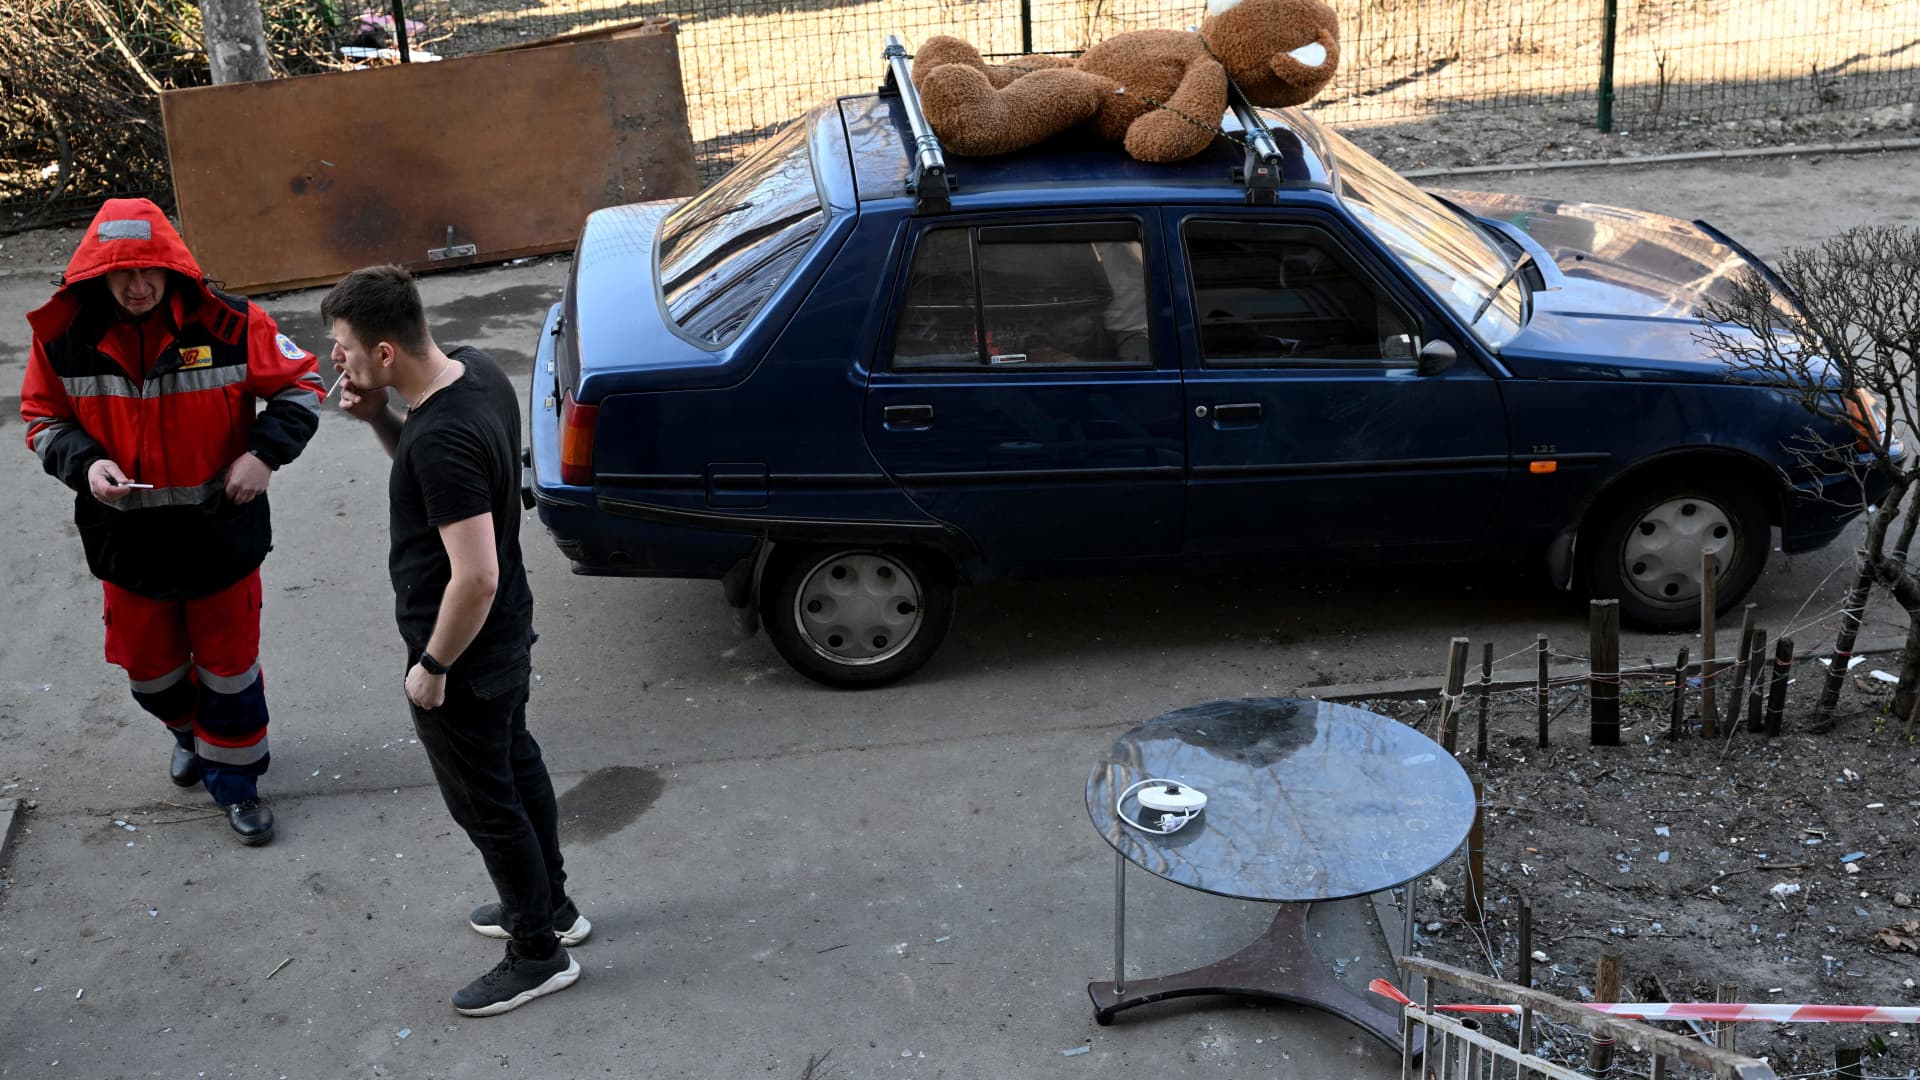 A local resident smokes a cigarette after retrieving amongst other things, a huge teddy bear, from his destroyed apartment, located in a five-storey residential building that partially collapsed after shelling the day before by Russian troops trying to encircle the Ukrainian capital as part of their slow-moving offensives, in Kyiv on March 20, 2022.